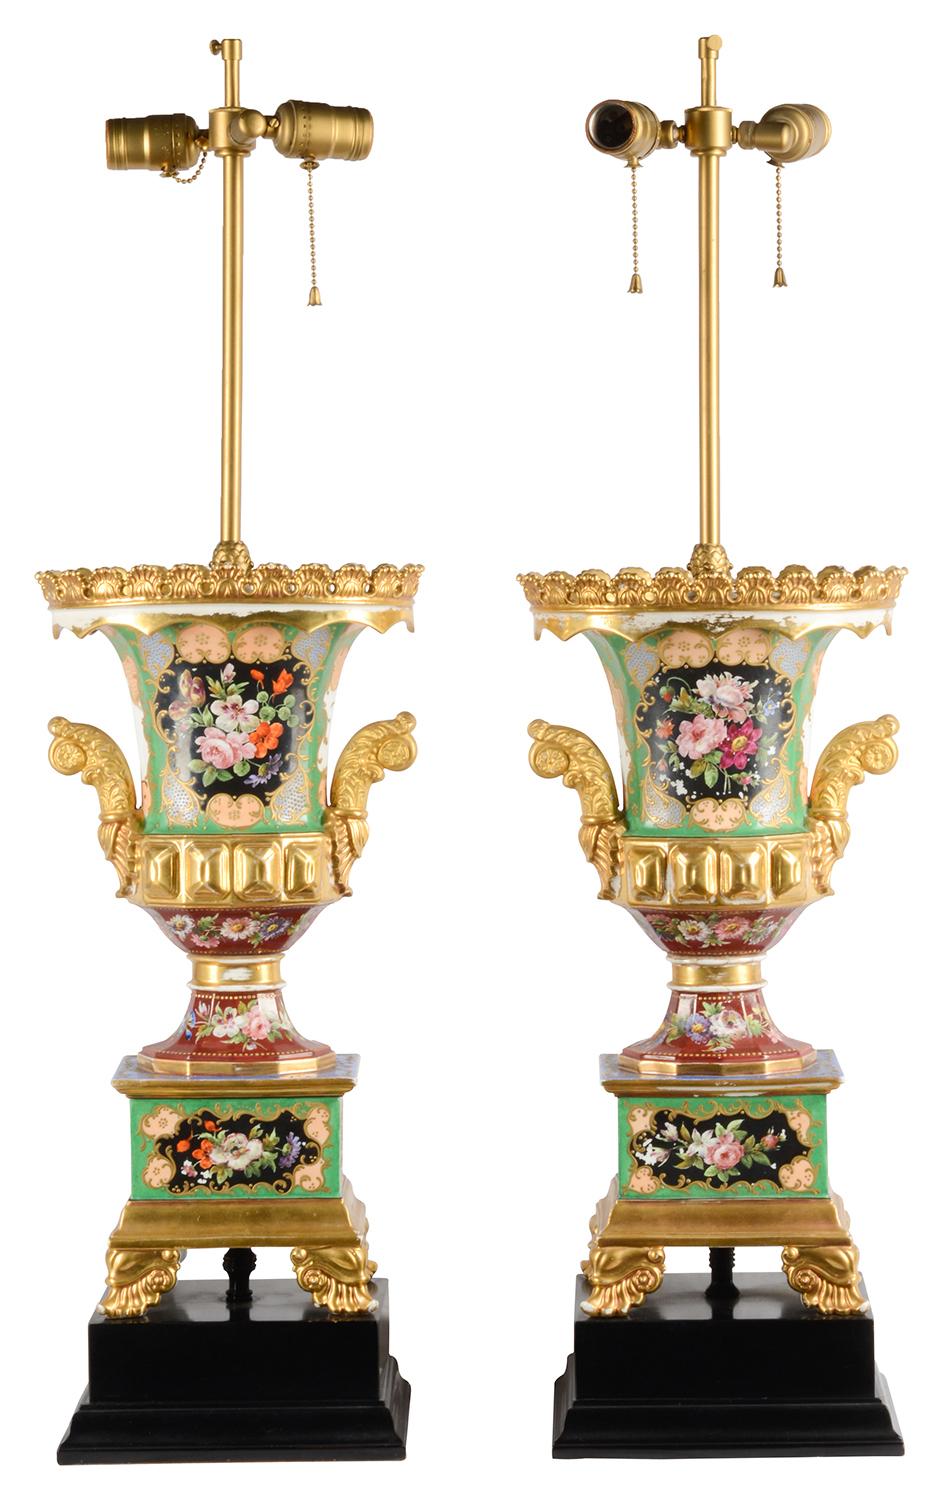 A very stylish pair of late 19th century Paris porcelain hand painted urns on stands converted to lamps. Each with wonderful inset painted panels of flowers, gilded Ormolu and porcelain mounts and handles, raised on plinth bases and ebonized bases.